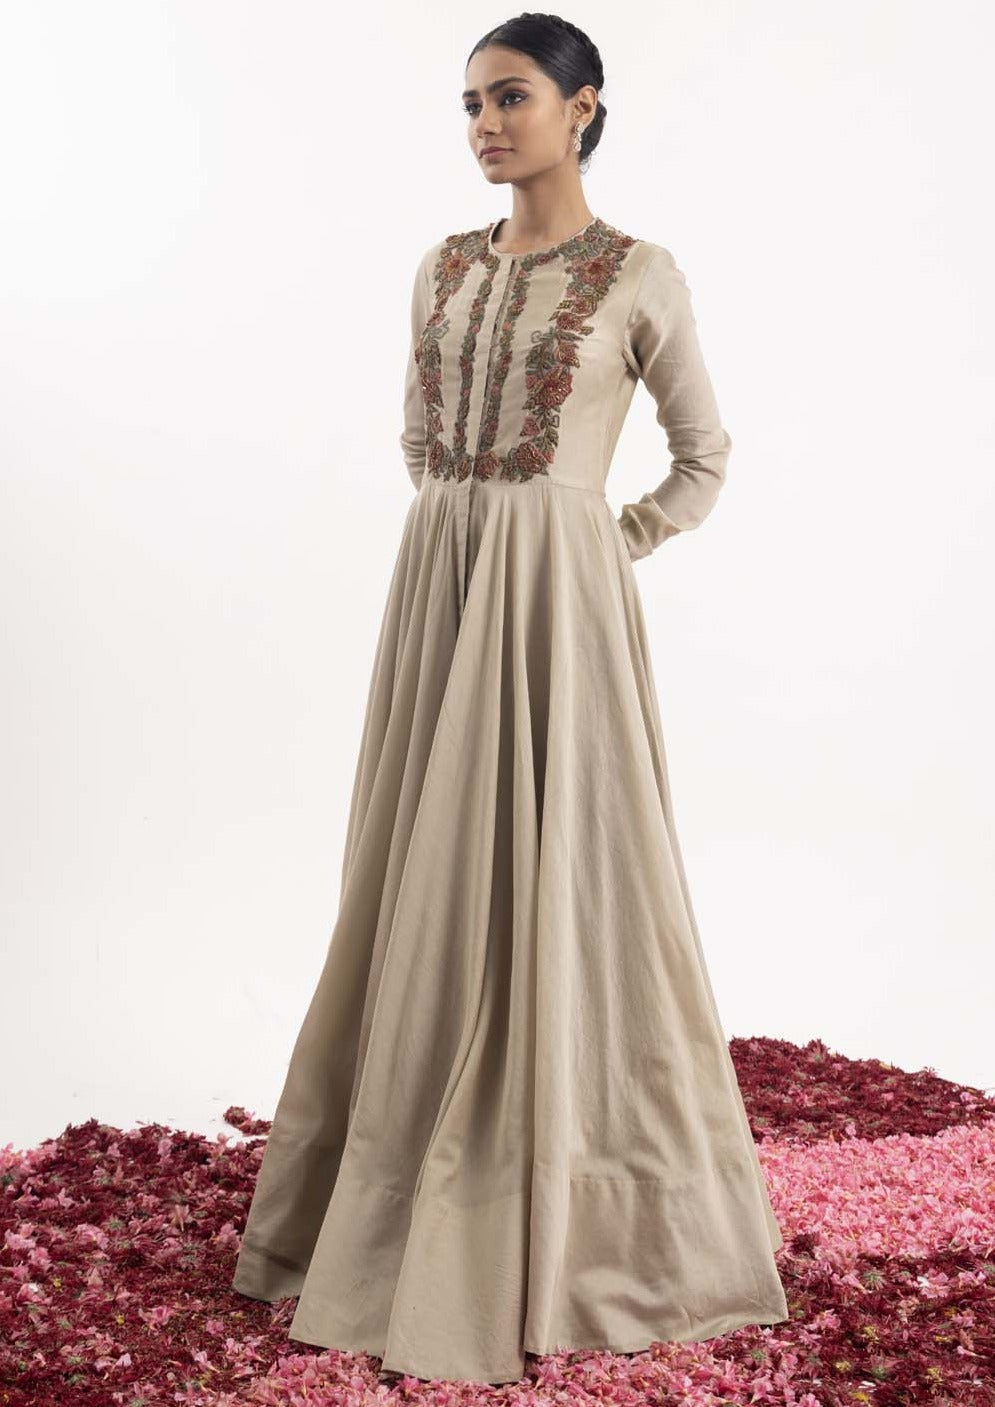 Anarkali meticulously embroidered by zardozi and appliqué work.